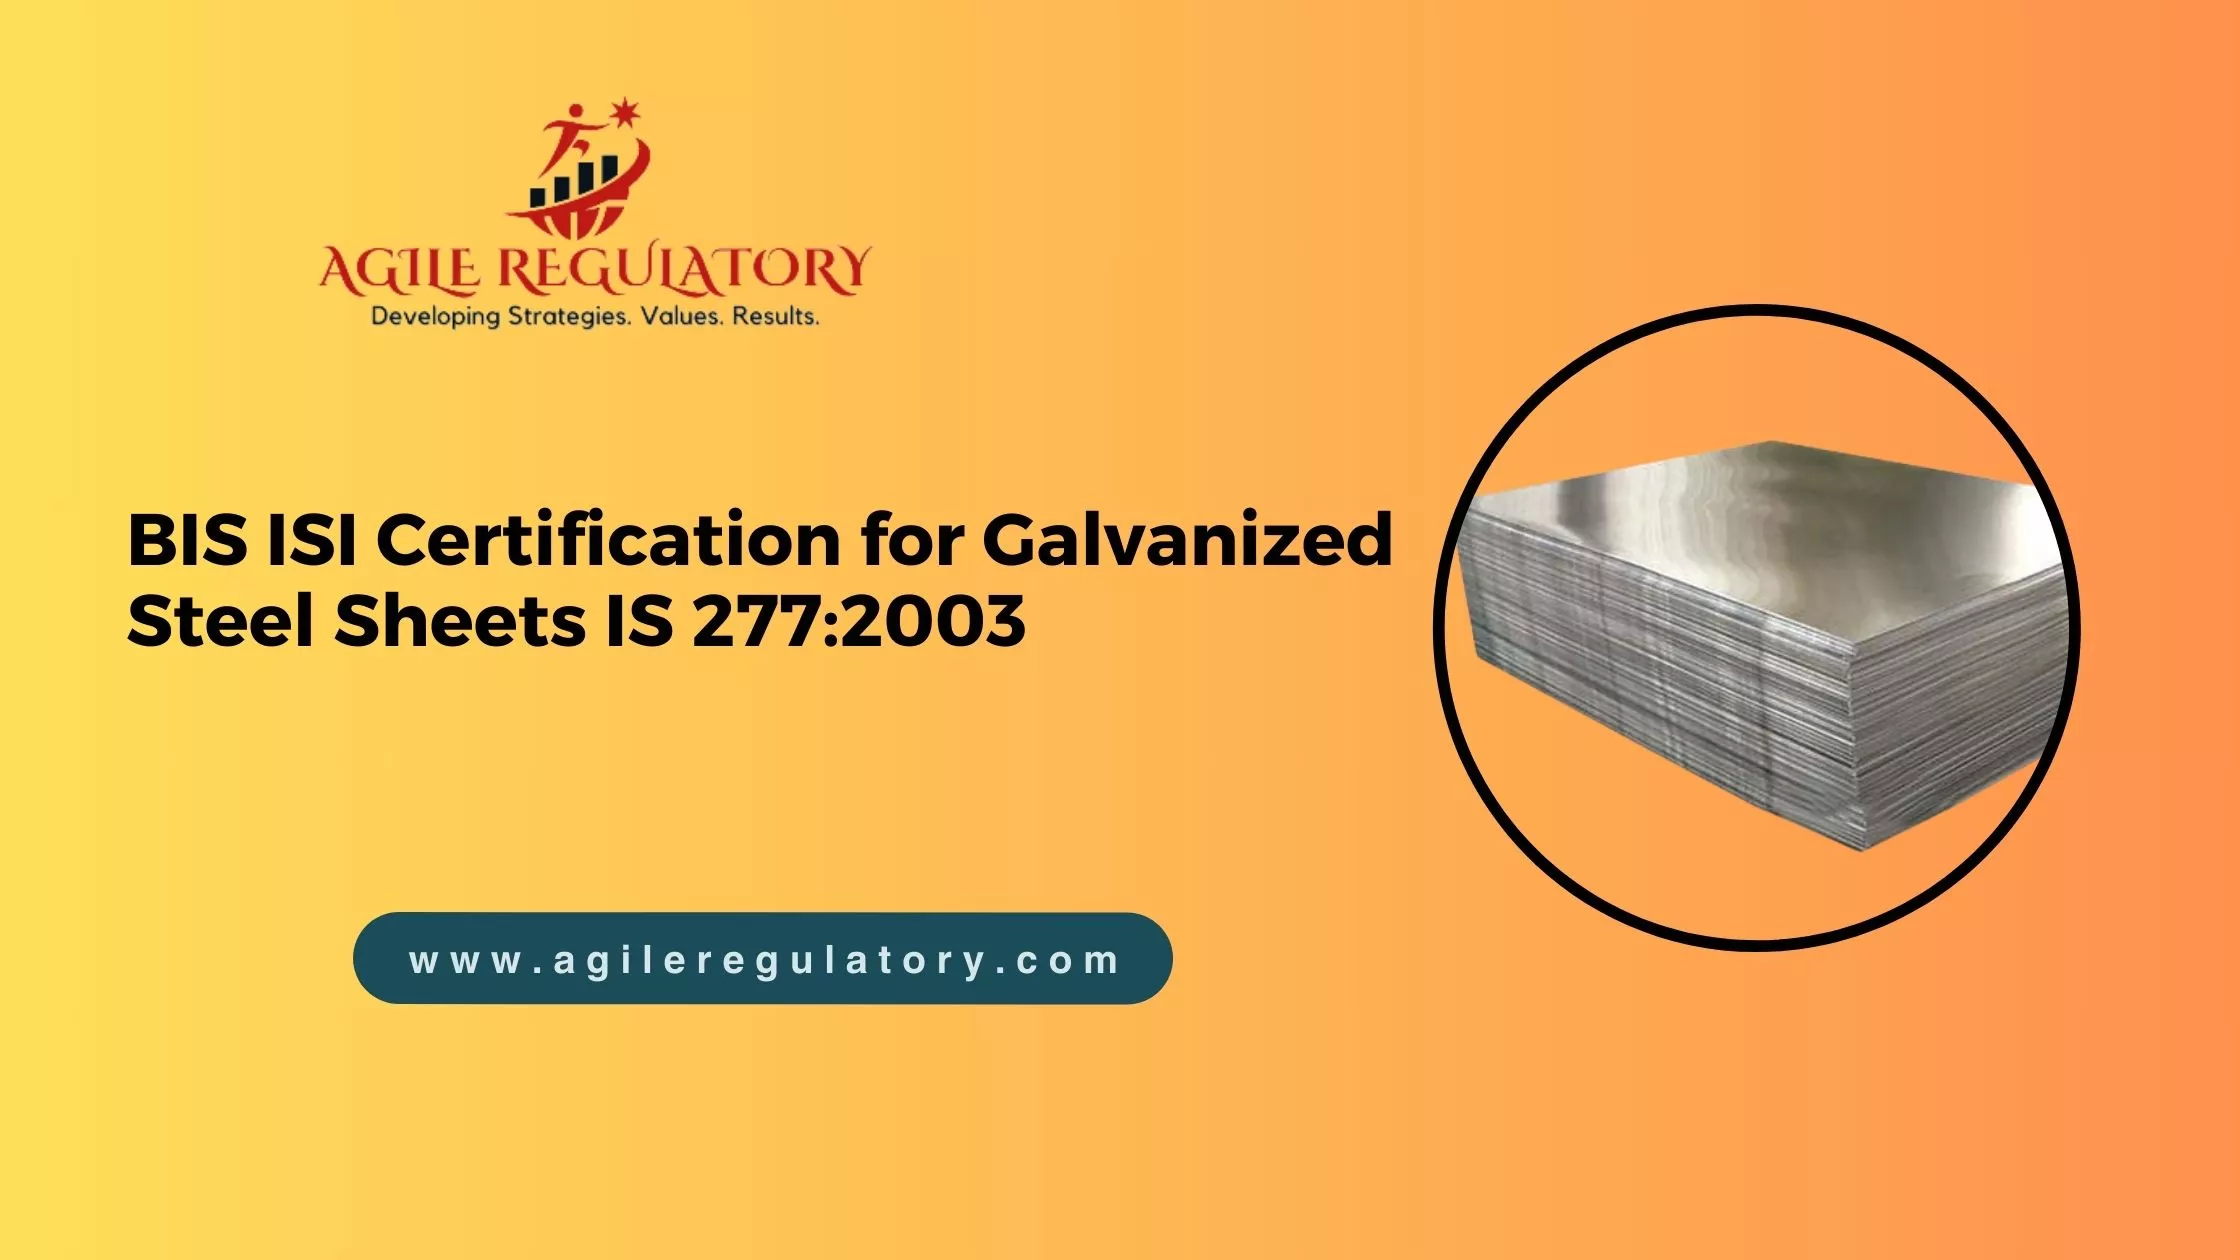 BIS ISI Certification for Galvanized Steel Sheets IS 277:2003